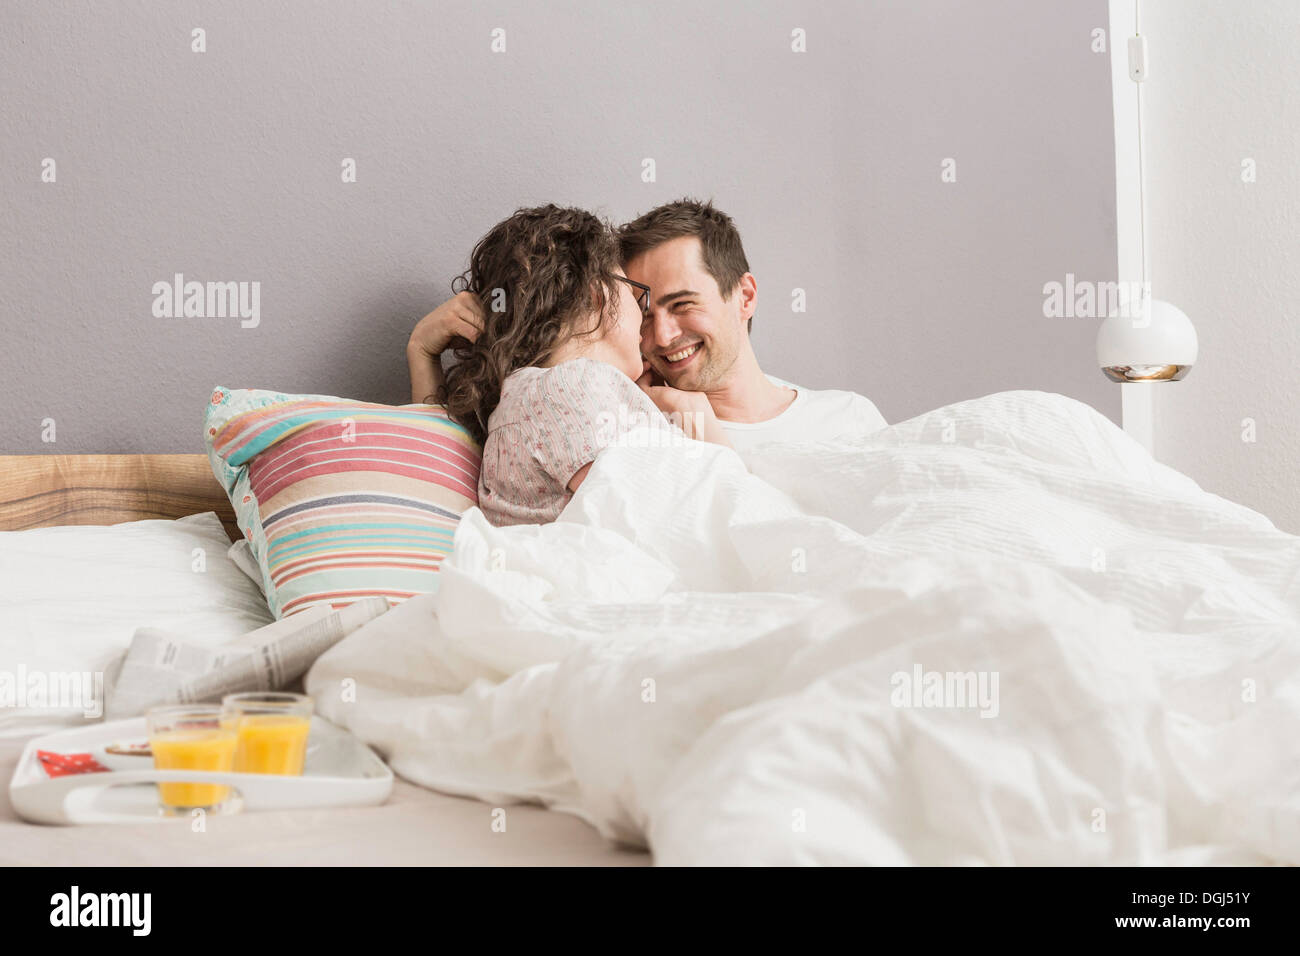 Mid adult couple lying in bed, breakfast on tray Stock Photo